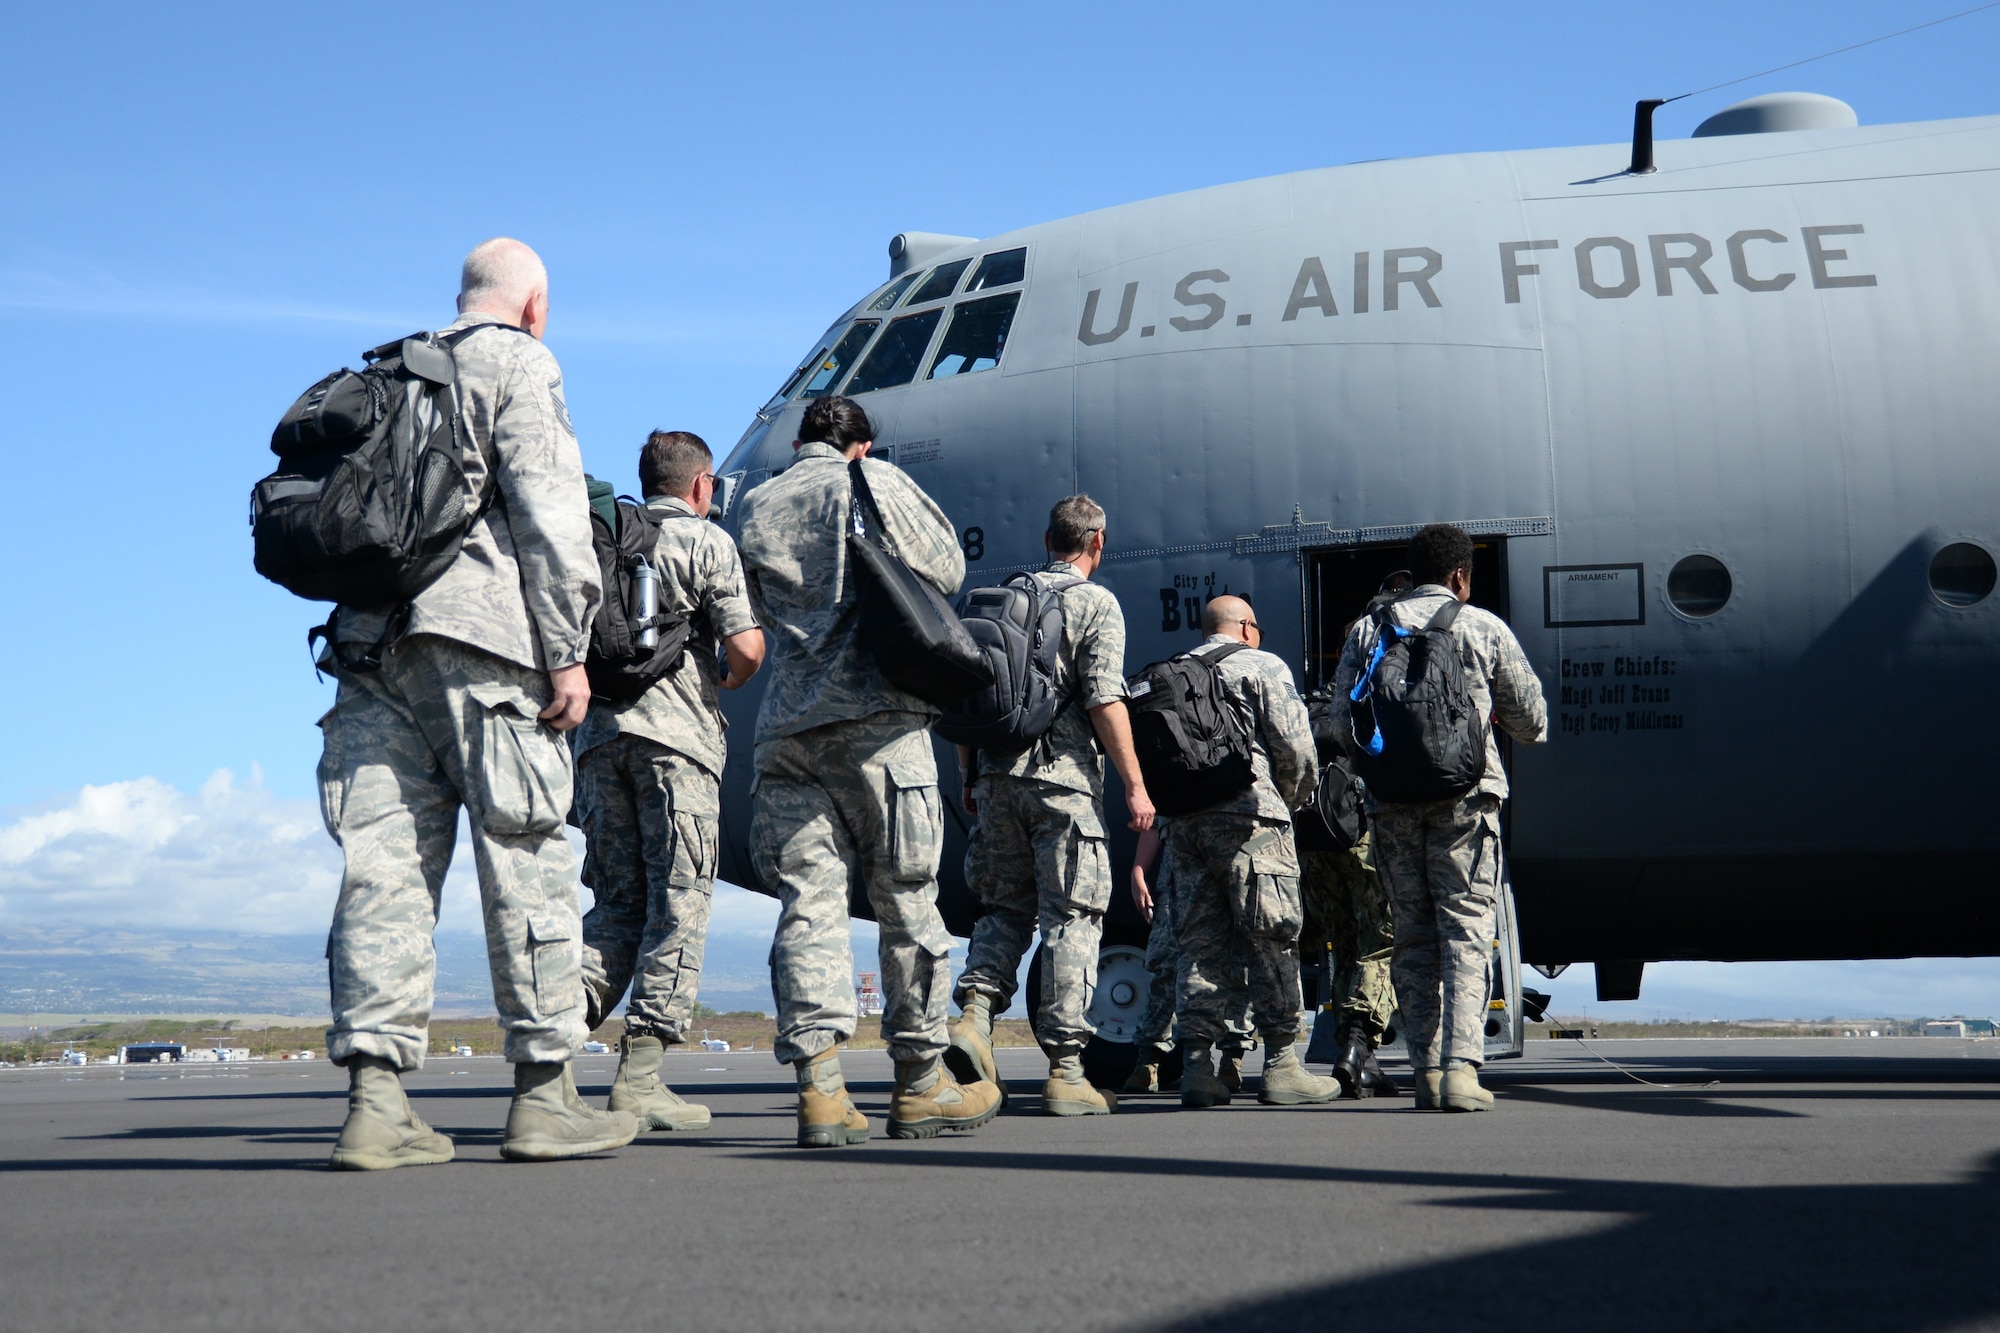 U.S. Air Force Airmen board a C-130 Hercules at Kahului Airport, Hawaii, for airlift to the island of Molokai for Tropic Care Maui County 2018, Hawaii, Aug. 10, 2018. Tropic Care Maui County 2018 is a joint service, hands-on readiness training mission that offered no-cost medical, dental and vision services to people at six locations across Maui, Molokai and Lanai from August 11-19. (U.S Air National Guard photo by Staff Sgt. Kevin Shulze)